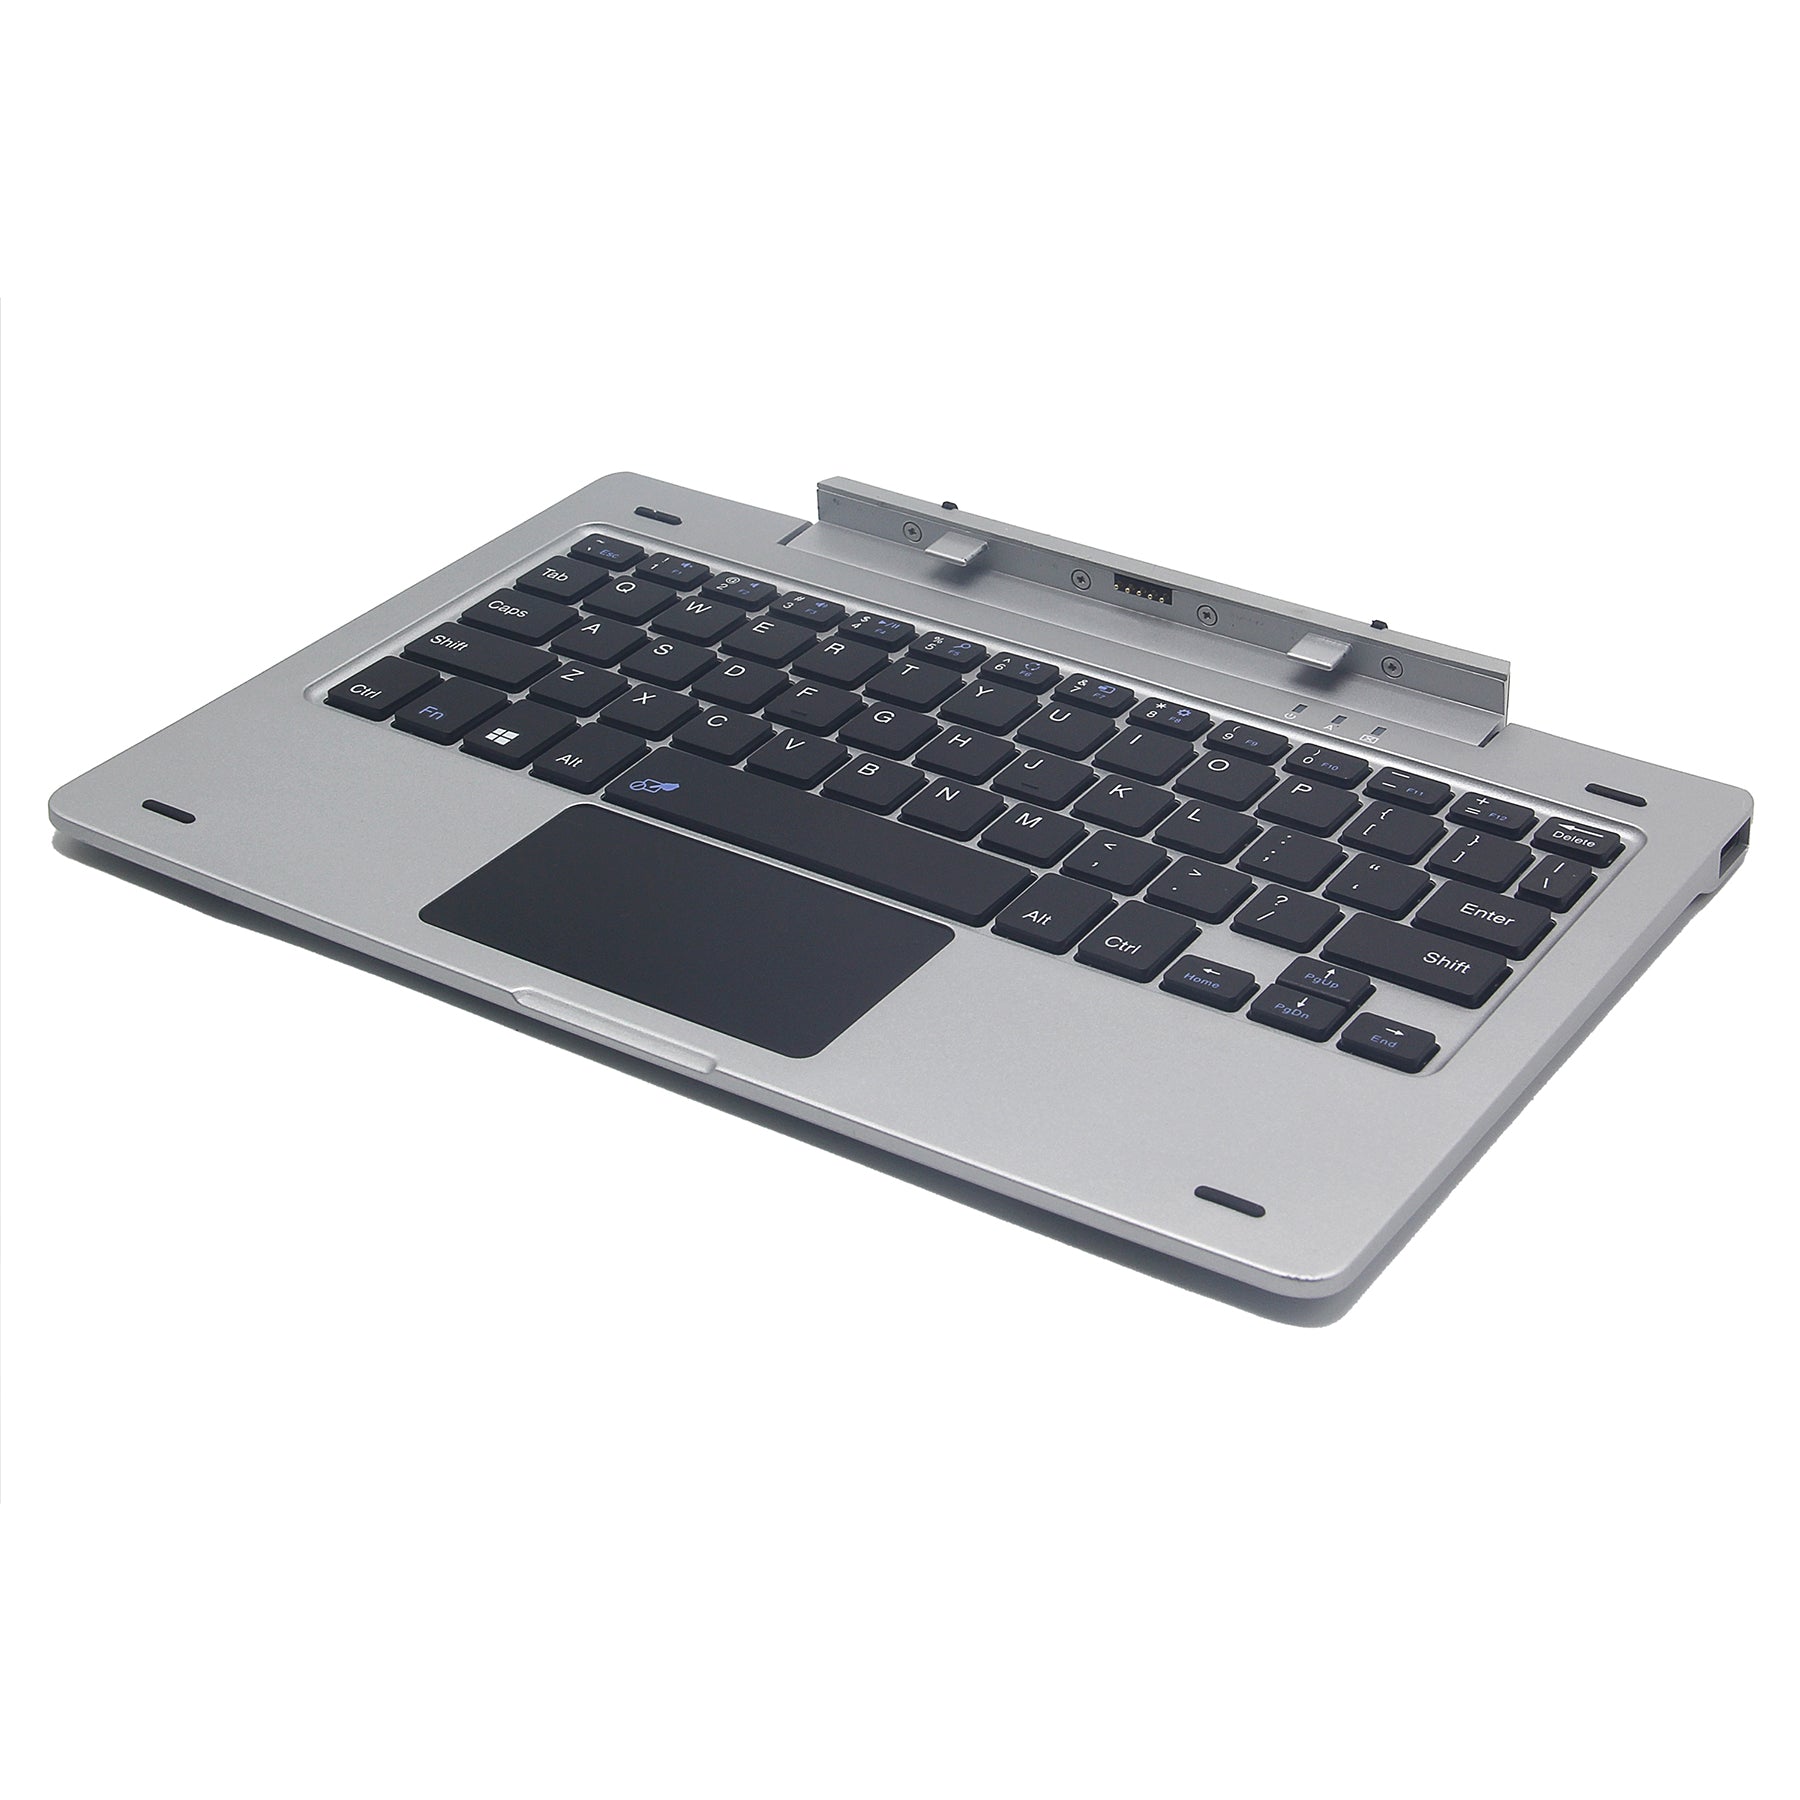 10.1” Windows Tablet and Keyboard – Supersonic Inc